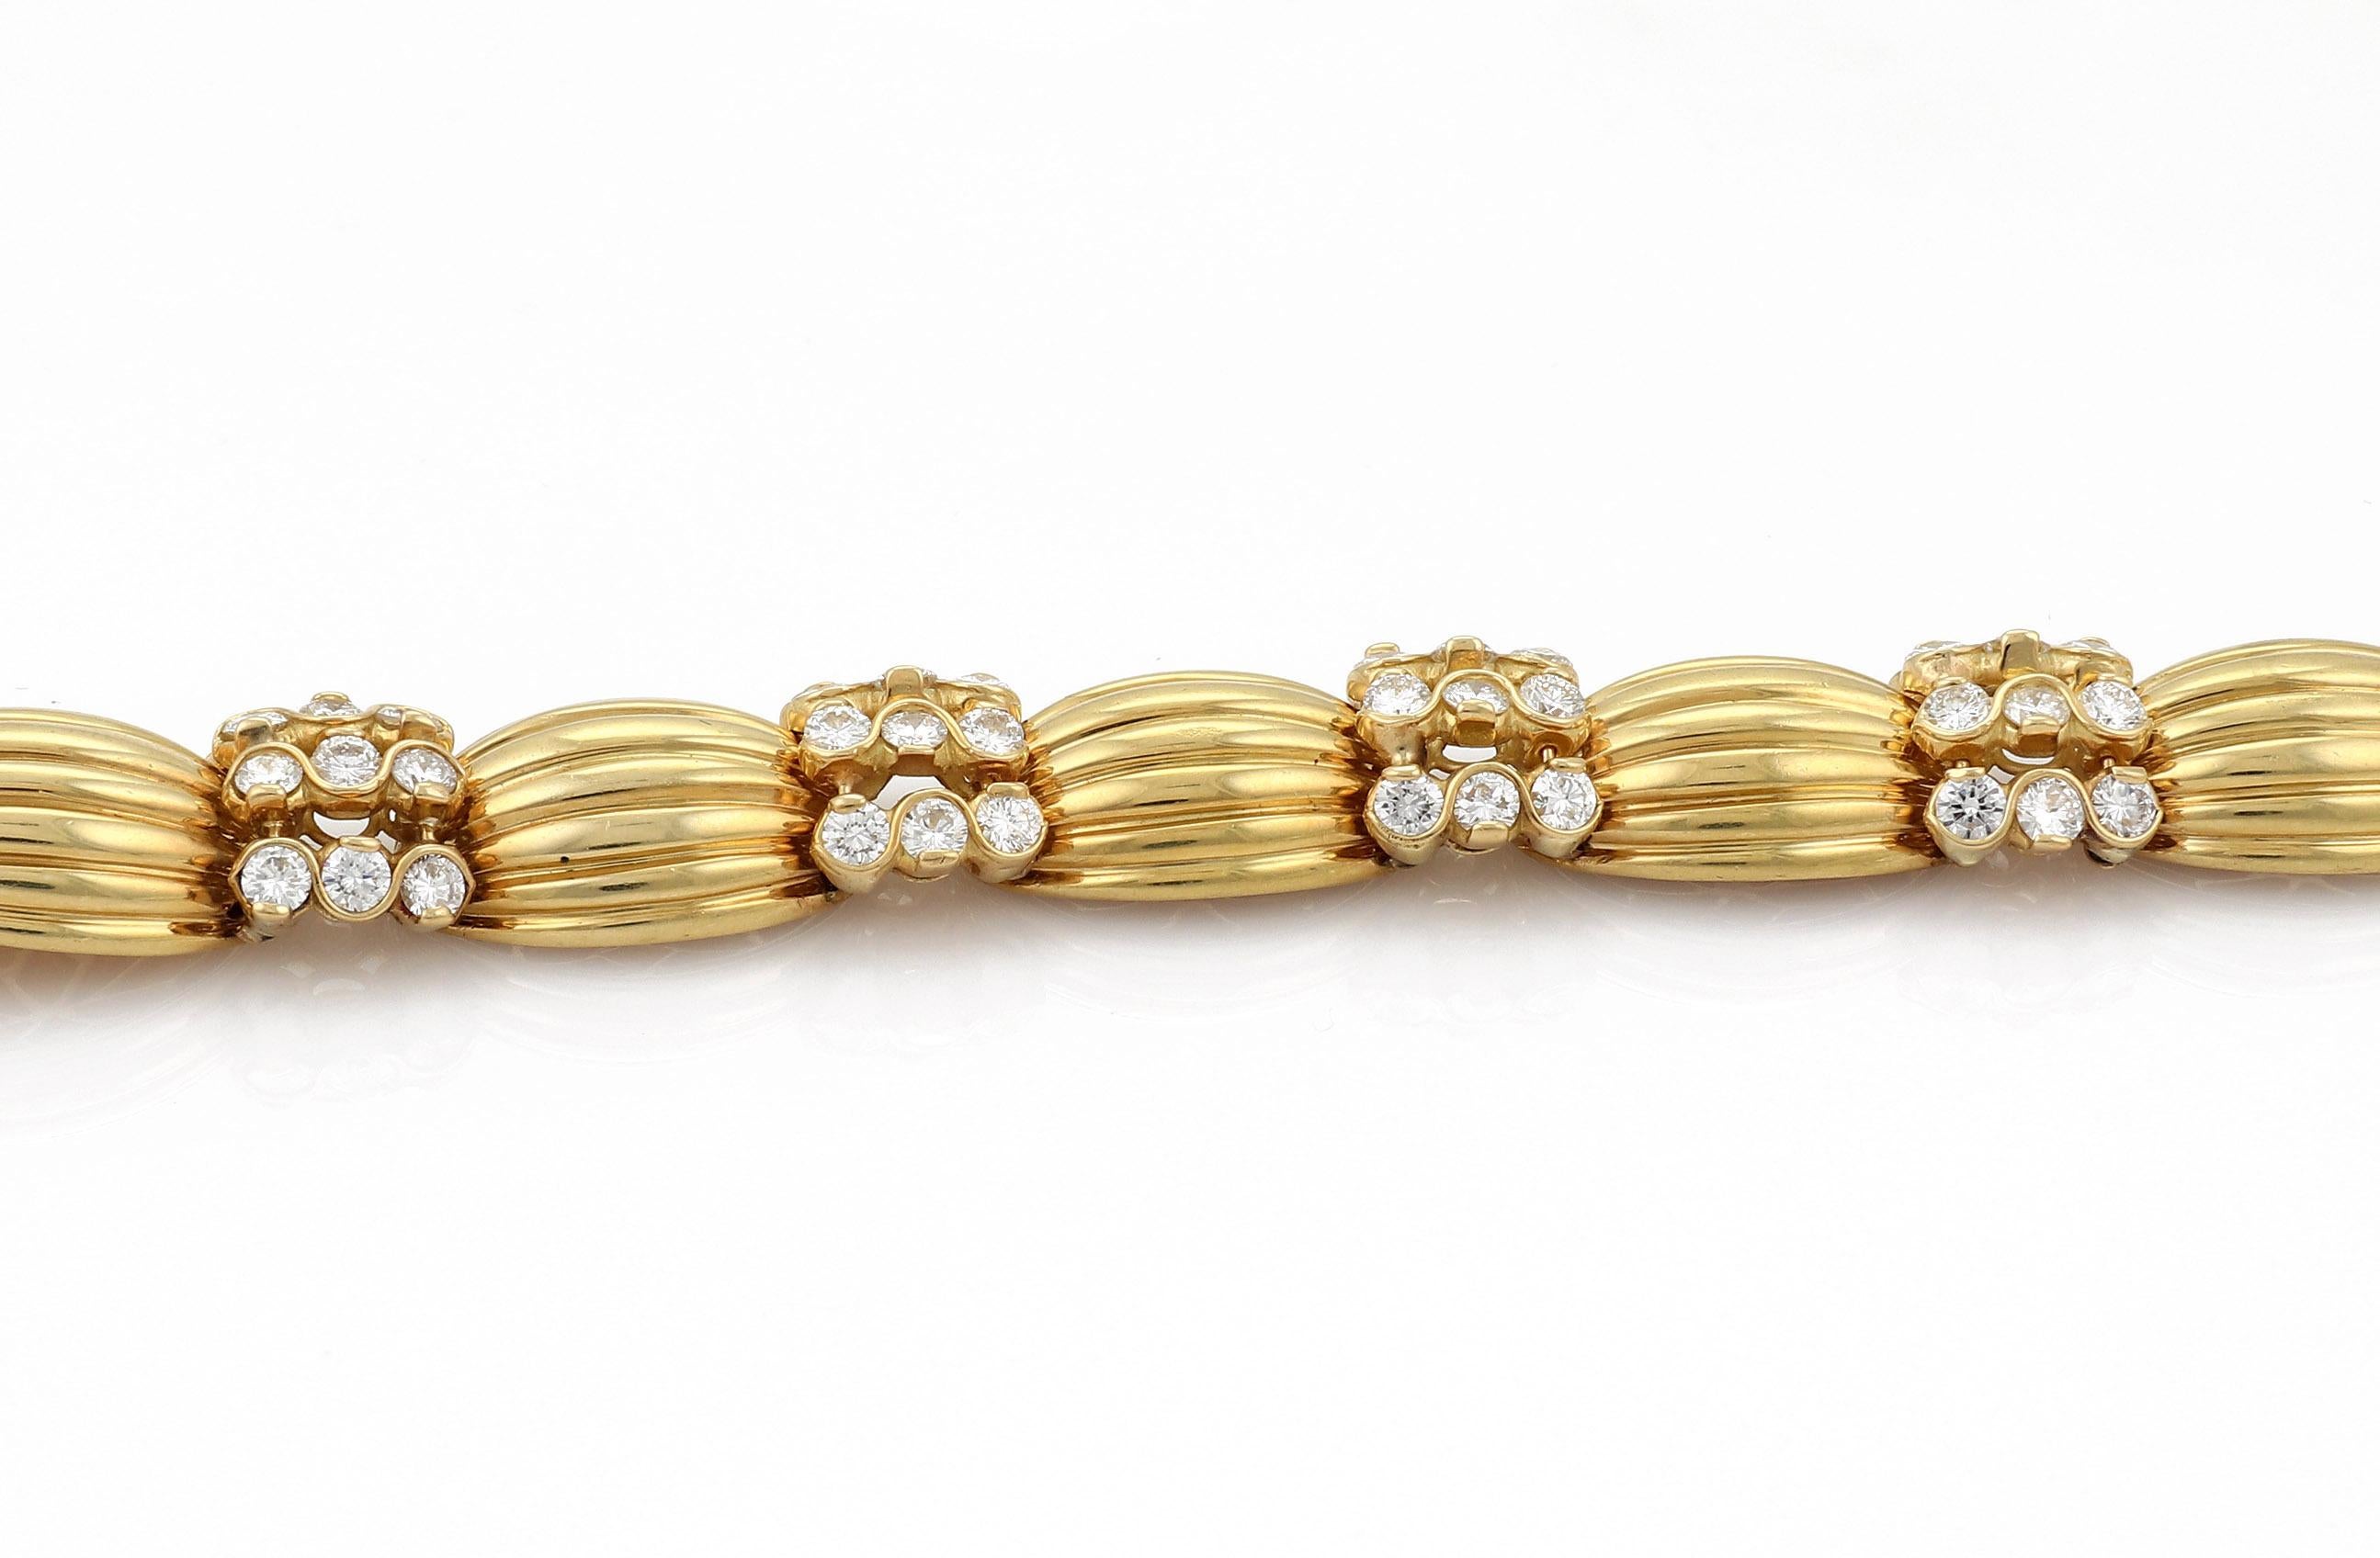 Heavy Solid 18k Yellow Gold 9.00ct Diamonds Ribbed Link Bracelet In Excellent Condition For Sale In Boca Raton, FL